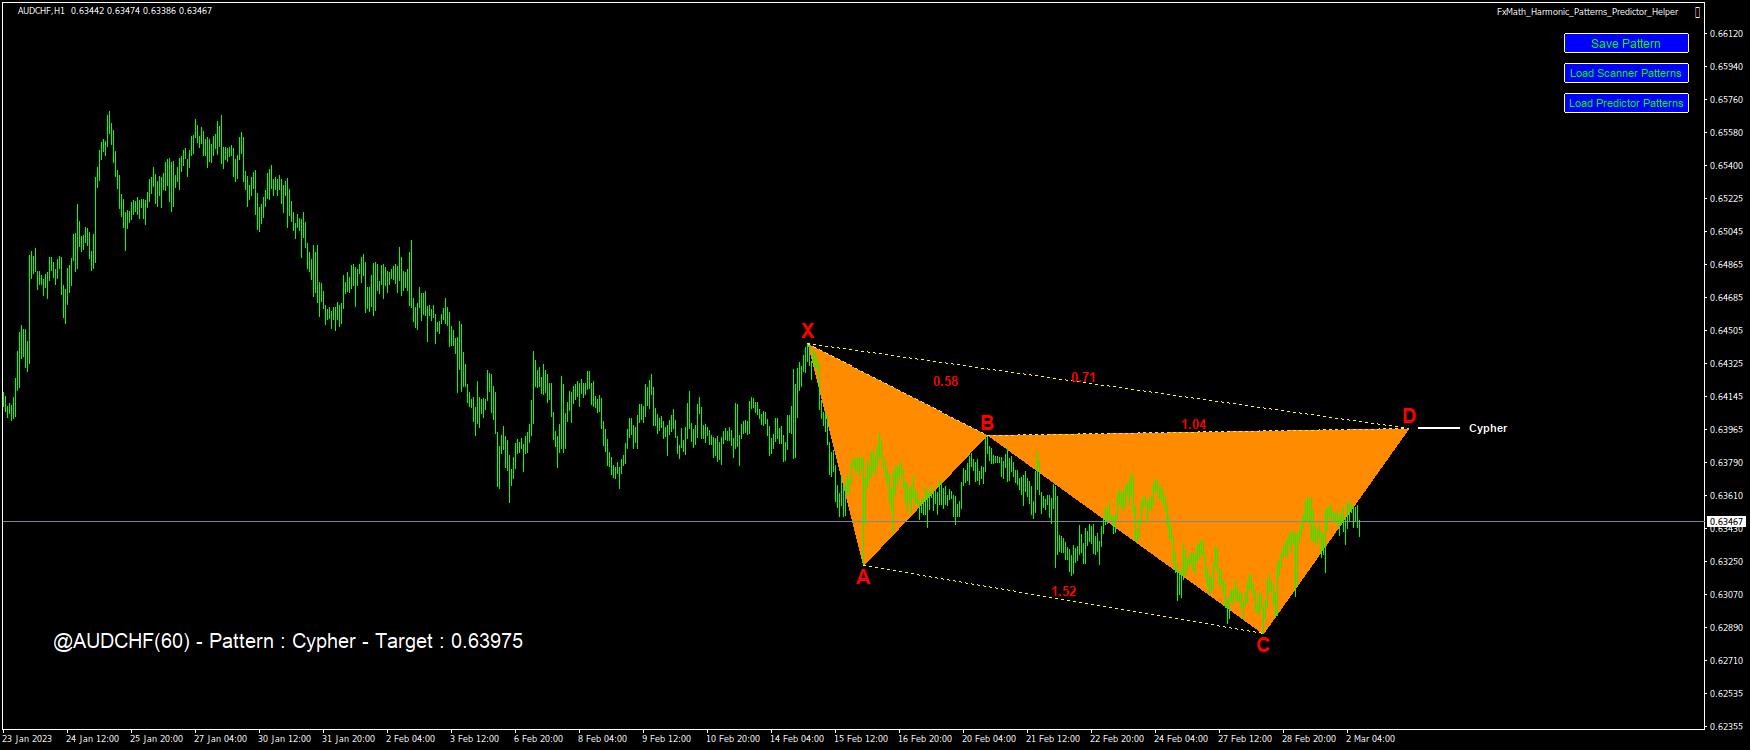 @AUDCHF(60) – Pattern : Cypher – Target : 0.63975-2023.03.02 12:10